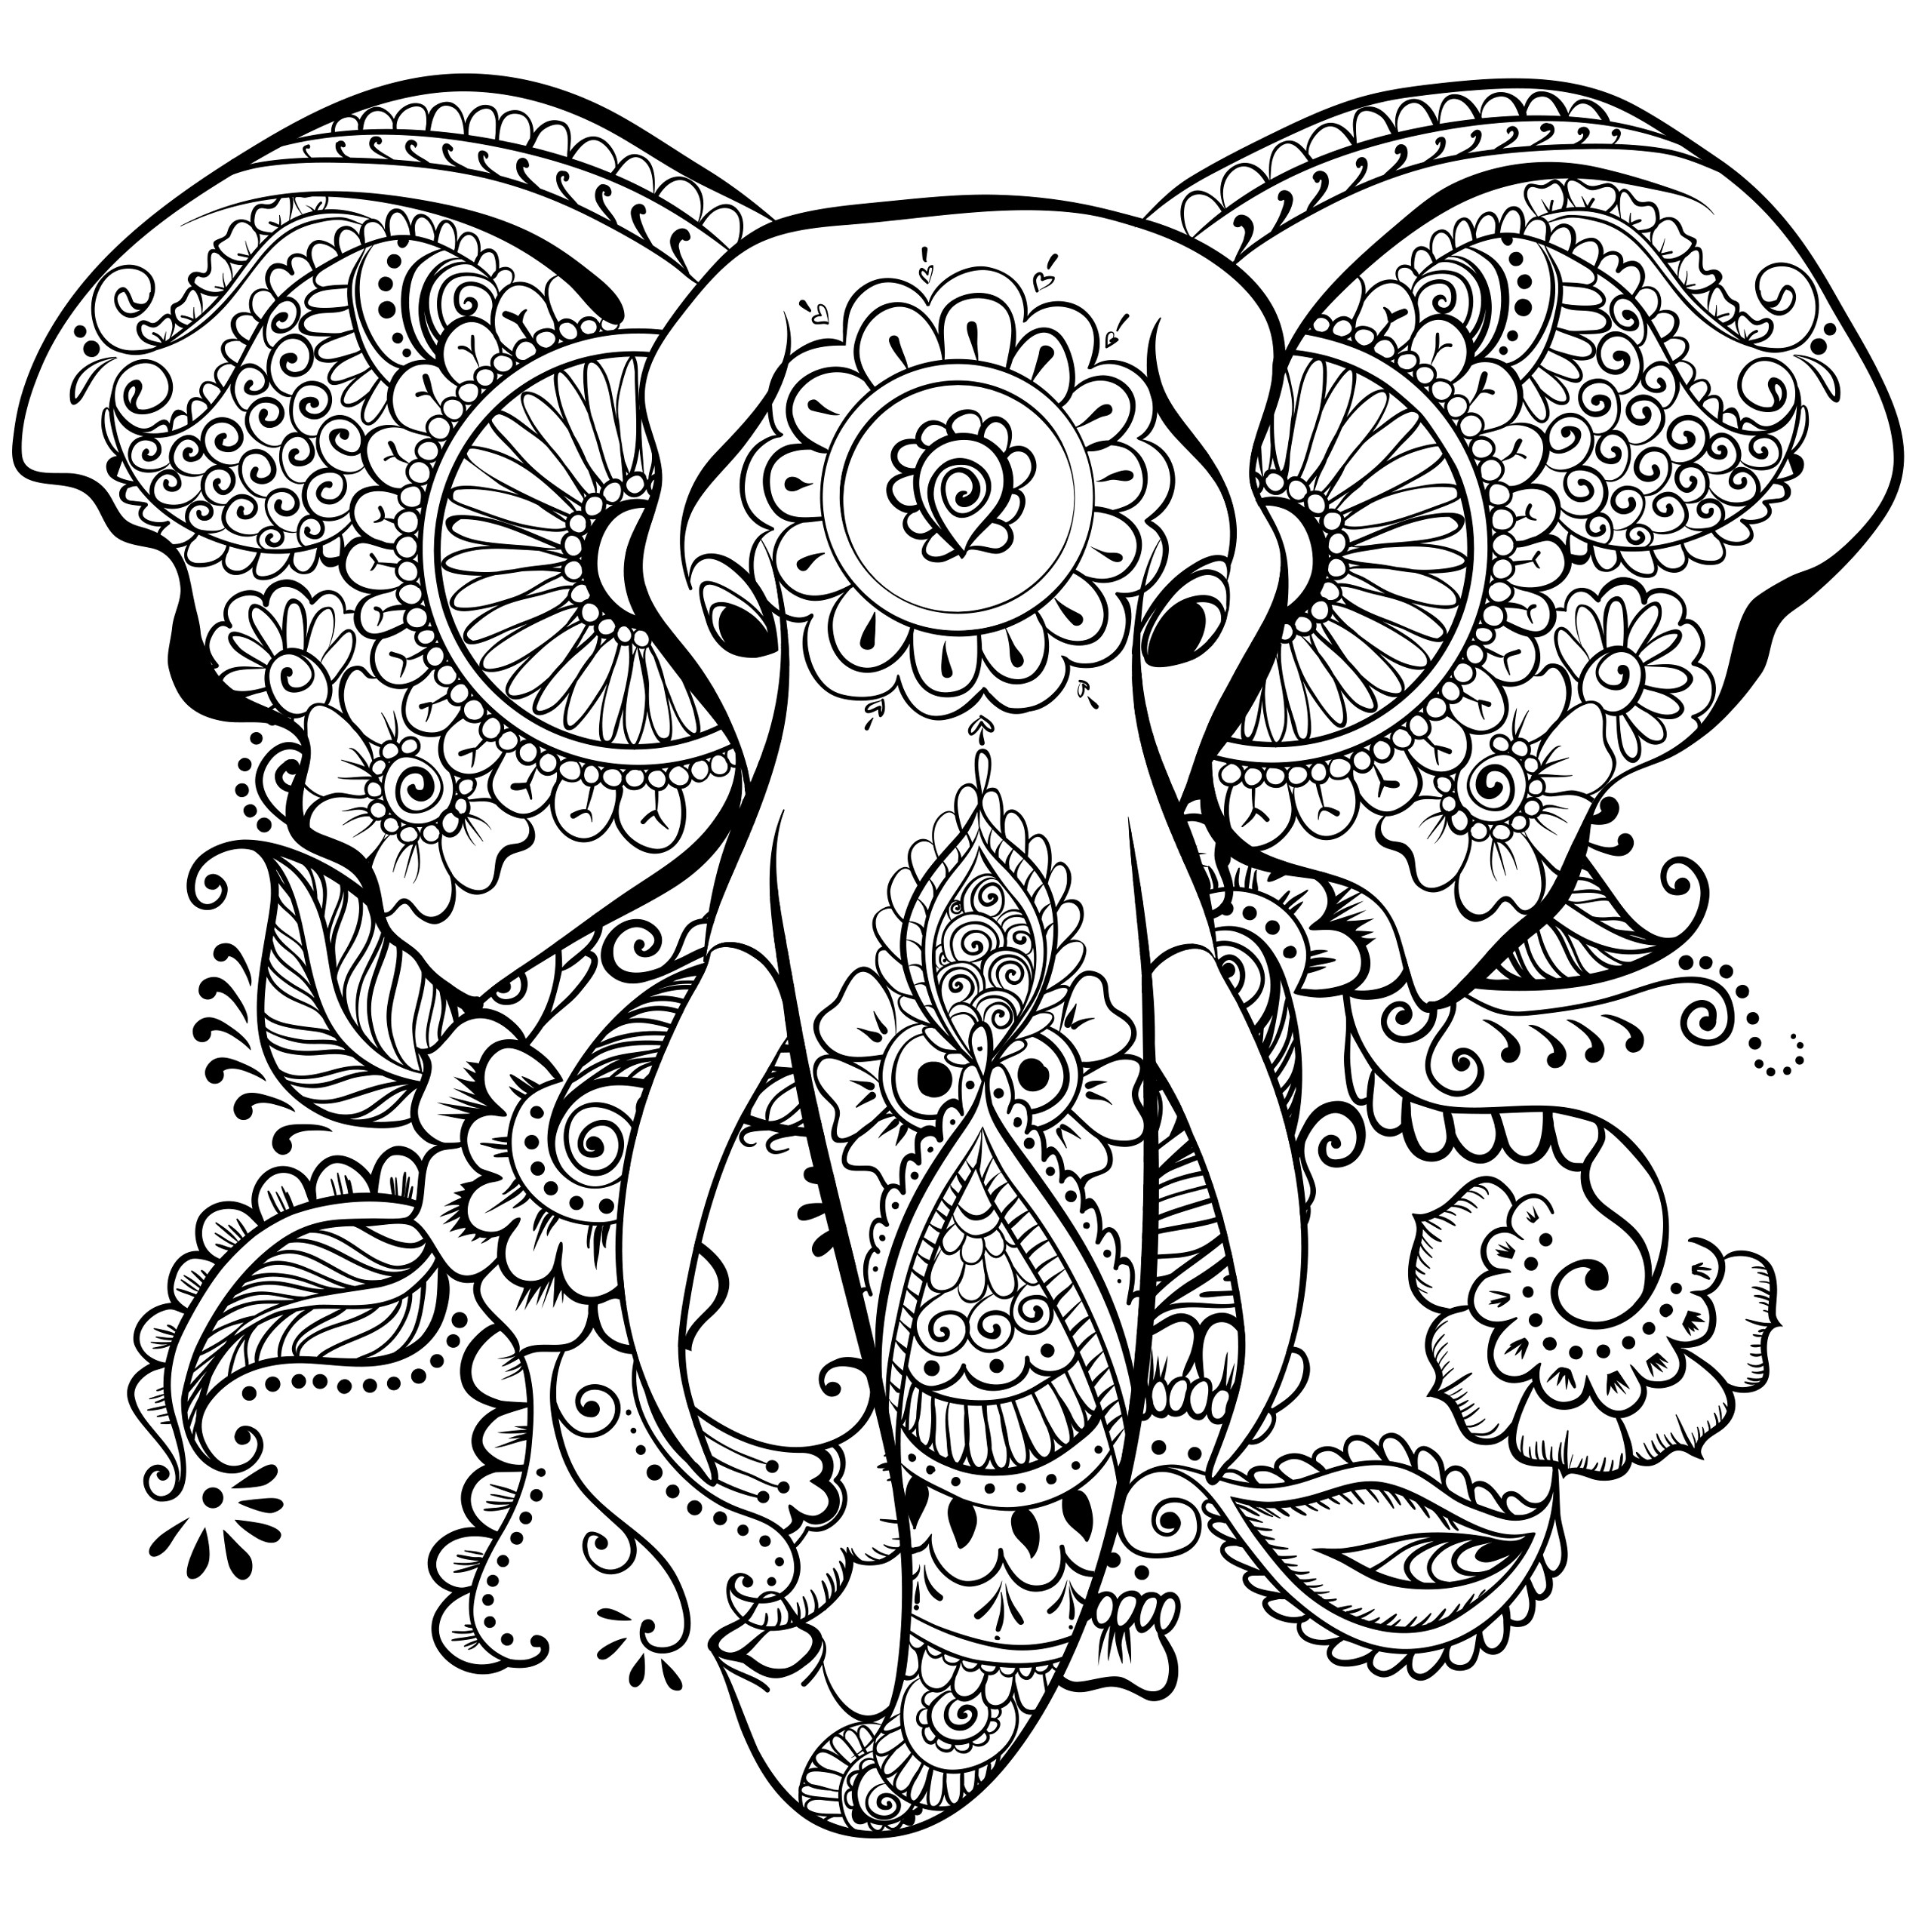 Adult Coloring Book Elephant
 63 Adult Coloring Pages To Nourish Your Mental Visual